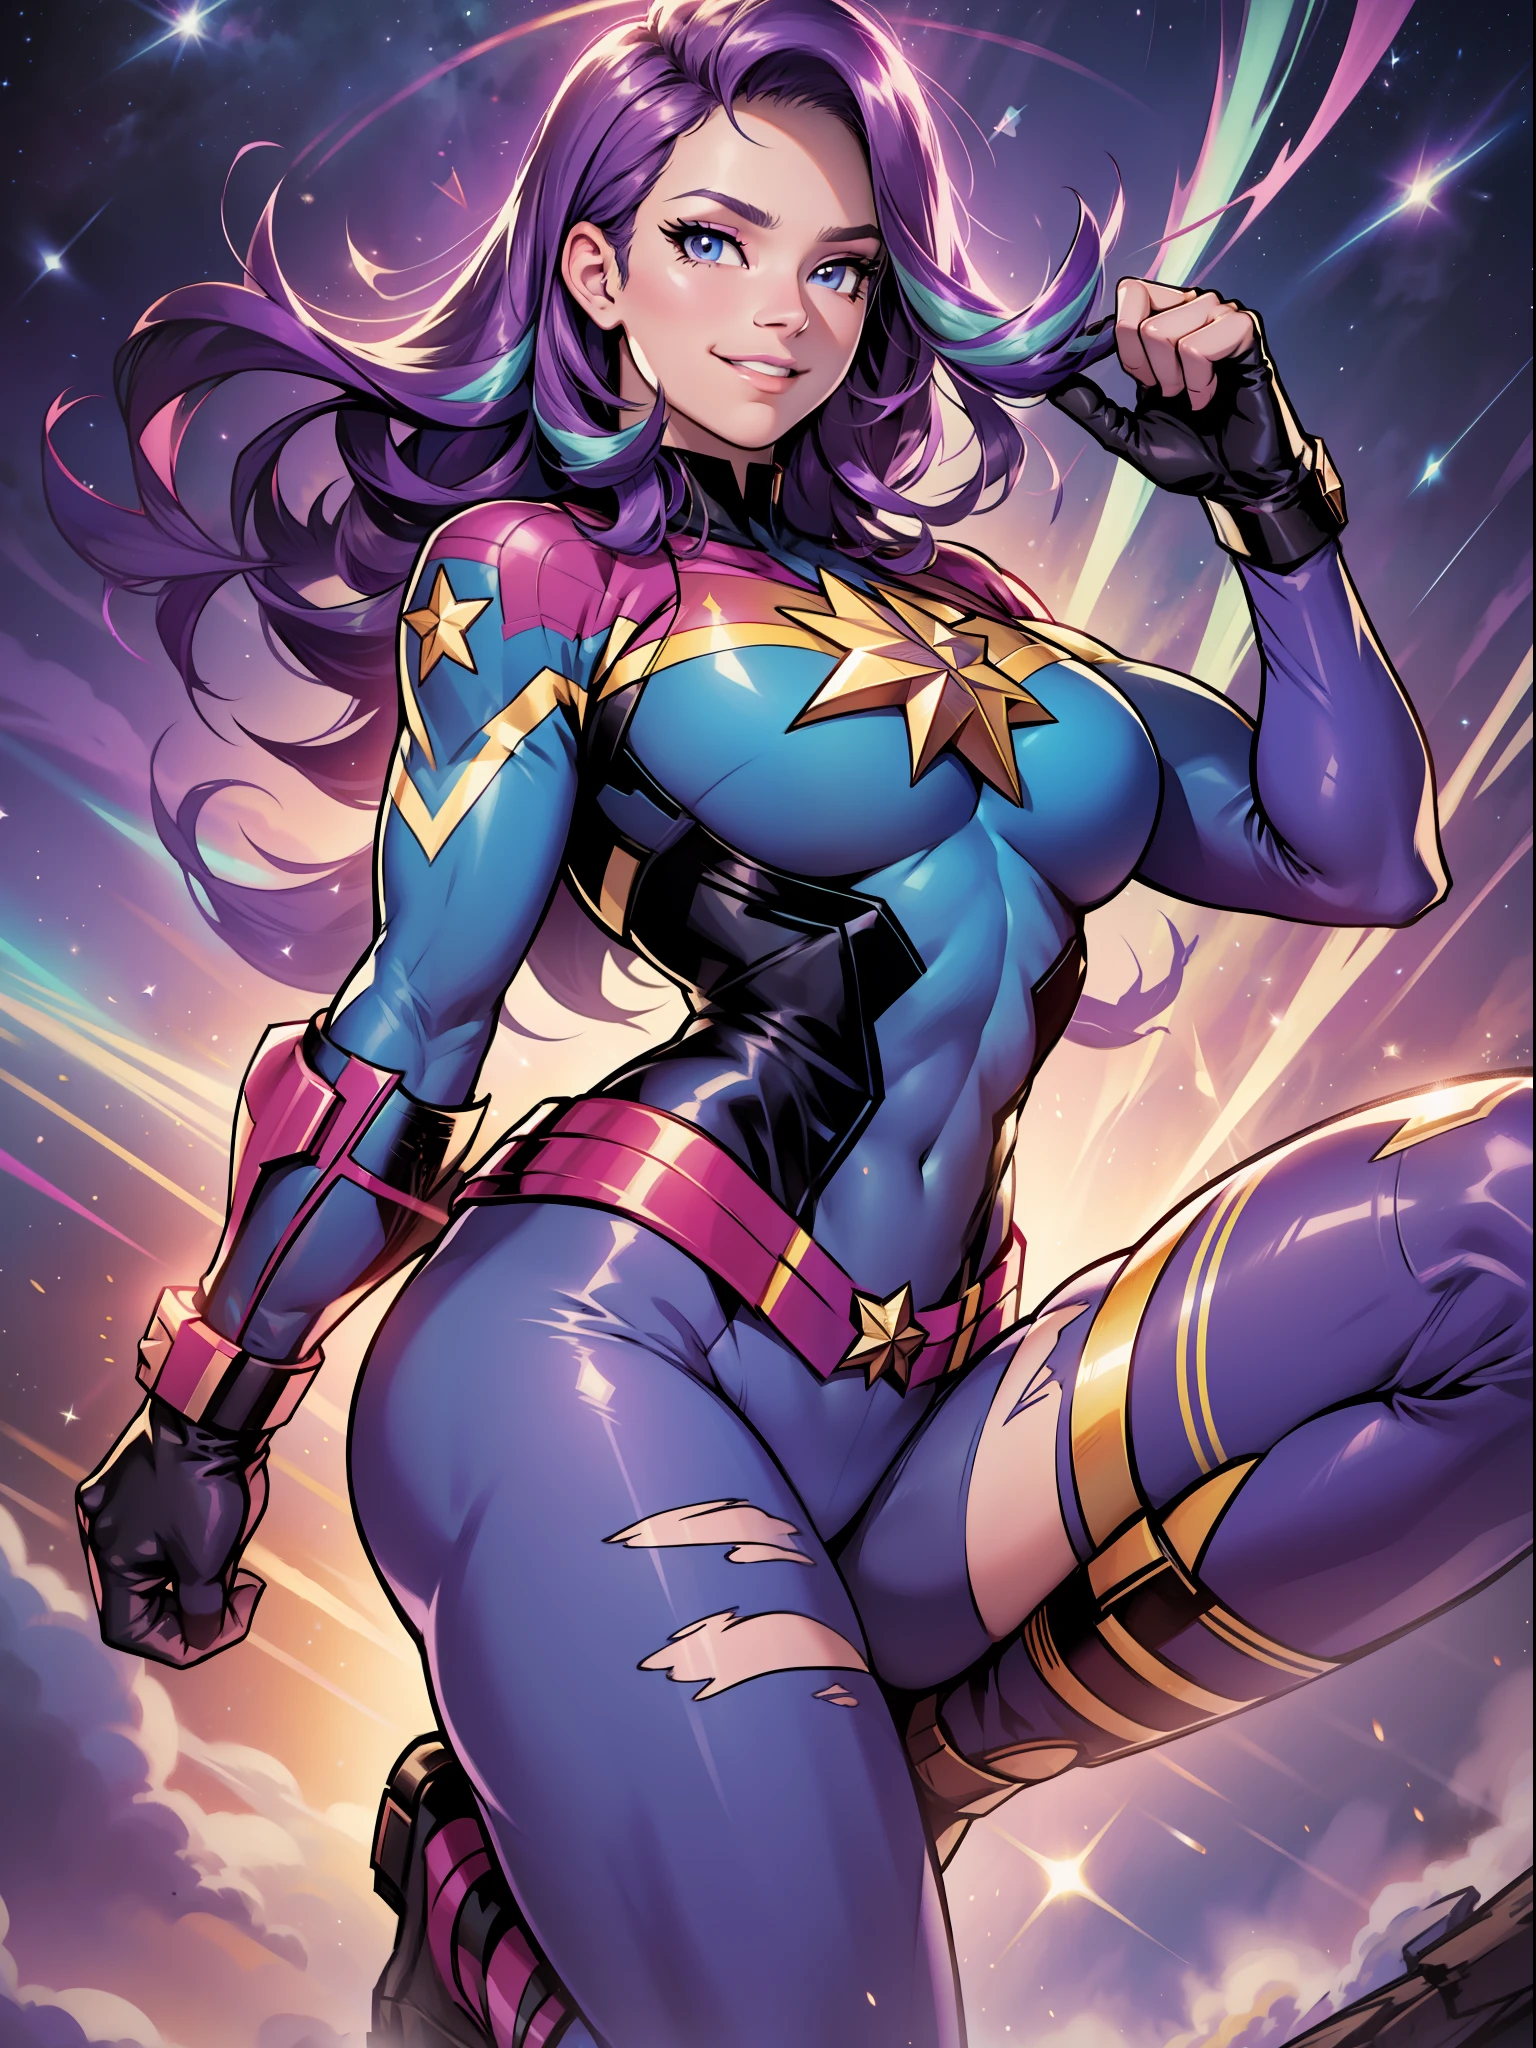 Starlight Glimmer, Huge-breasts, Lush breasts, Elastic breasts, hairlong, Luxurious hairstyle, In the costume of Captain Marvel, purple blue suit, Elegant boots, in the sky, superhero, A bunch of blue magic, Blue Trail, brawn, in full height, Smiling, Magic, Flight beam, beste-Qualit, Very detailed, 8K quality, in full height